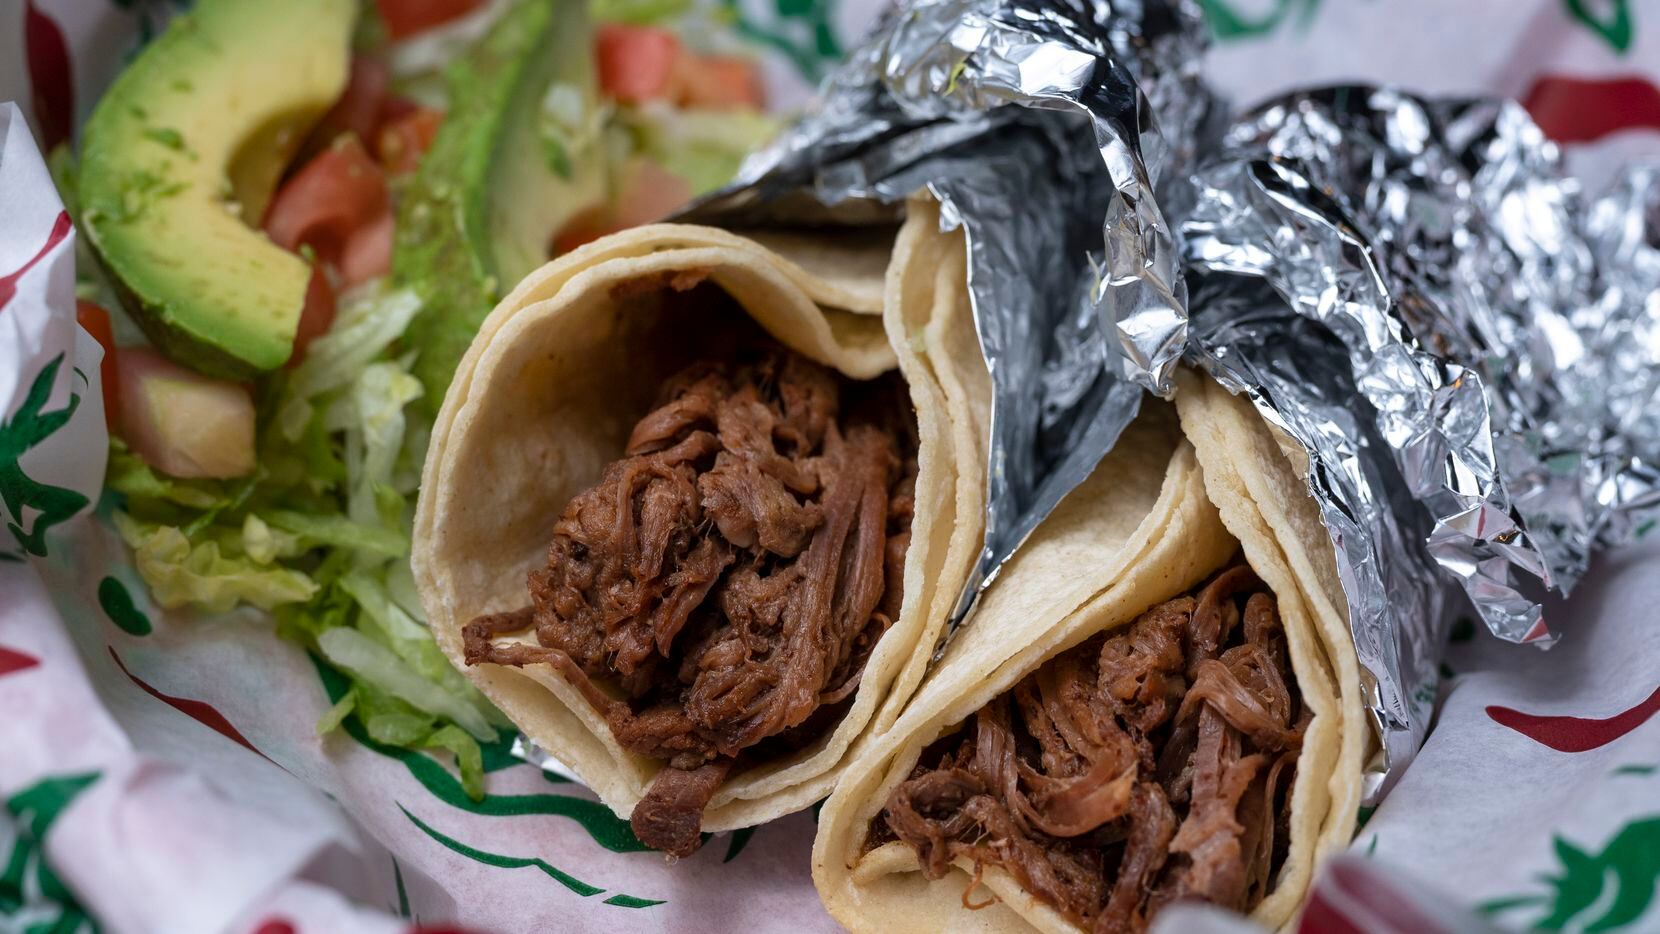 A Brisket Taco Combo severed with lettuce, tomato and avocado from Taco Joint in Dallas, on Monday, June 28, 2021. The food company will go from having four restaurants to seven by the end of 2021. It's Taco Joint's biggest expansion.